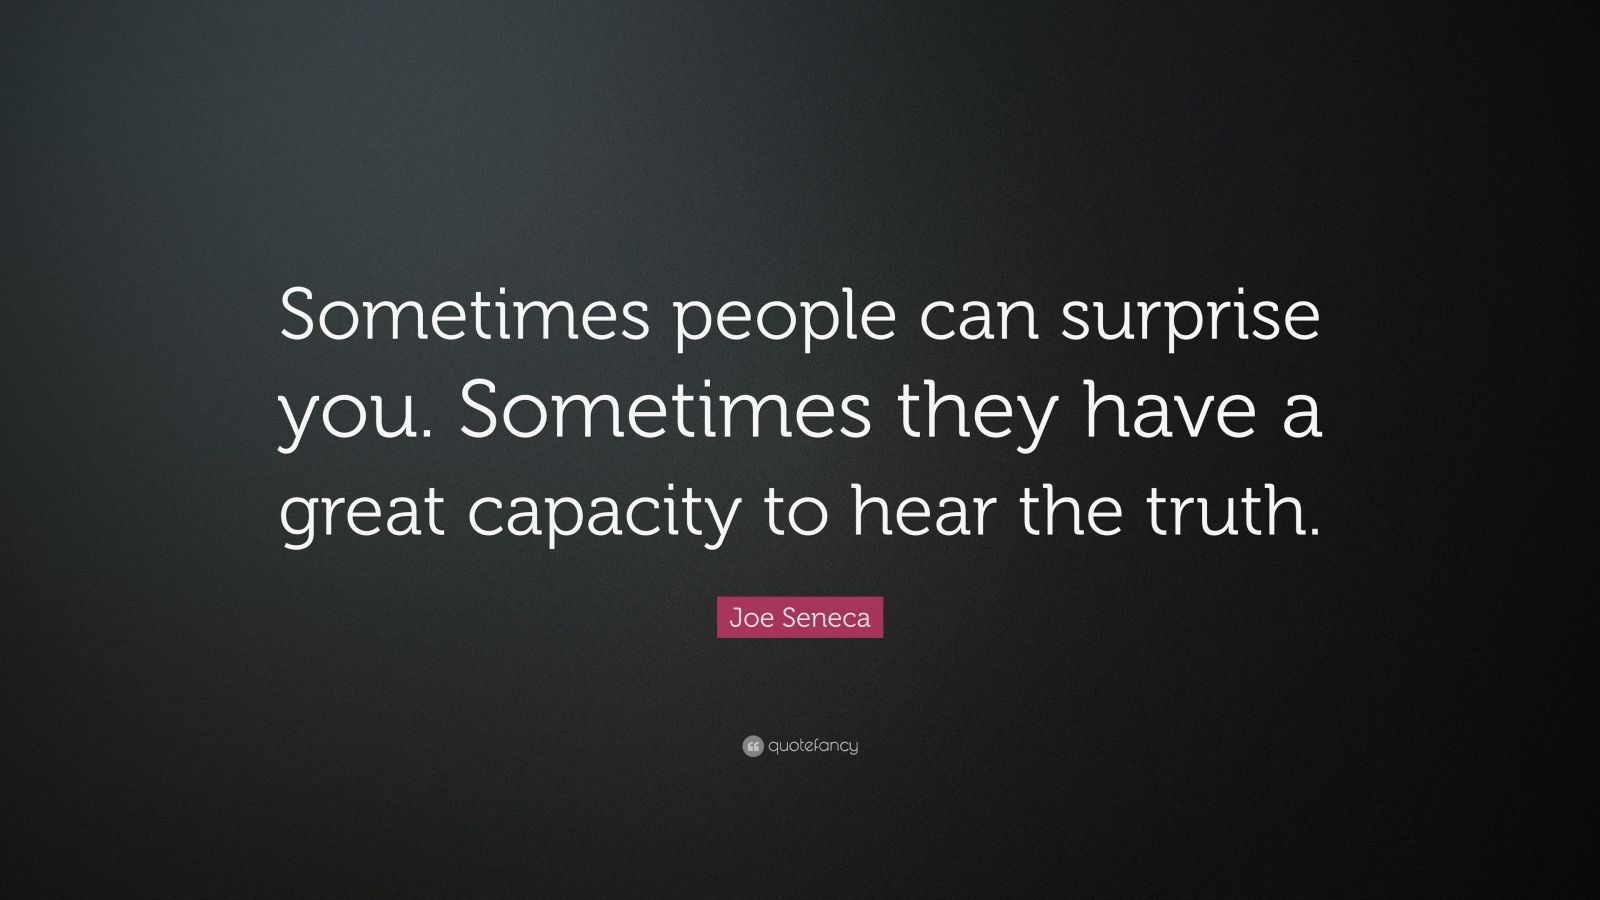 Joe Seneca Quote: “Sometimes people can surprise you. Sometimes they ...